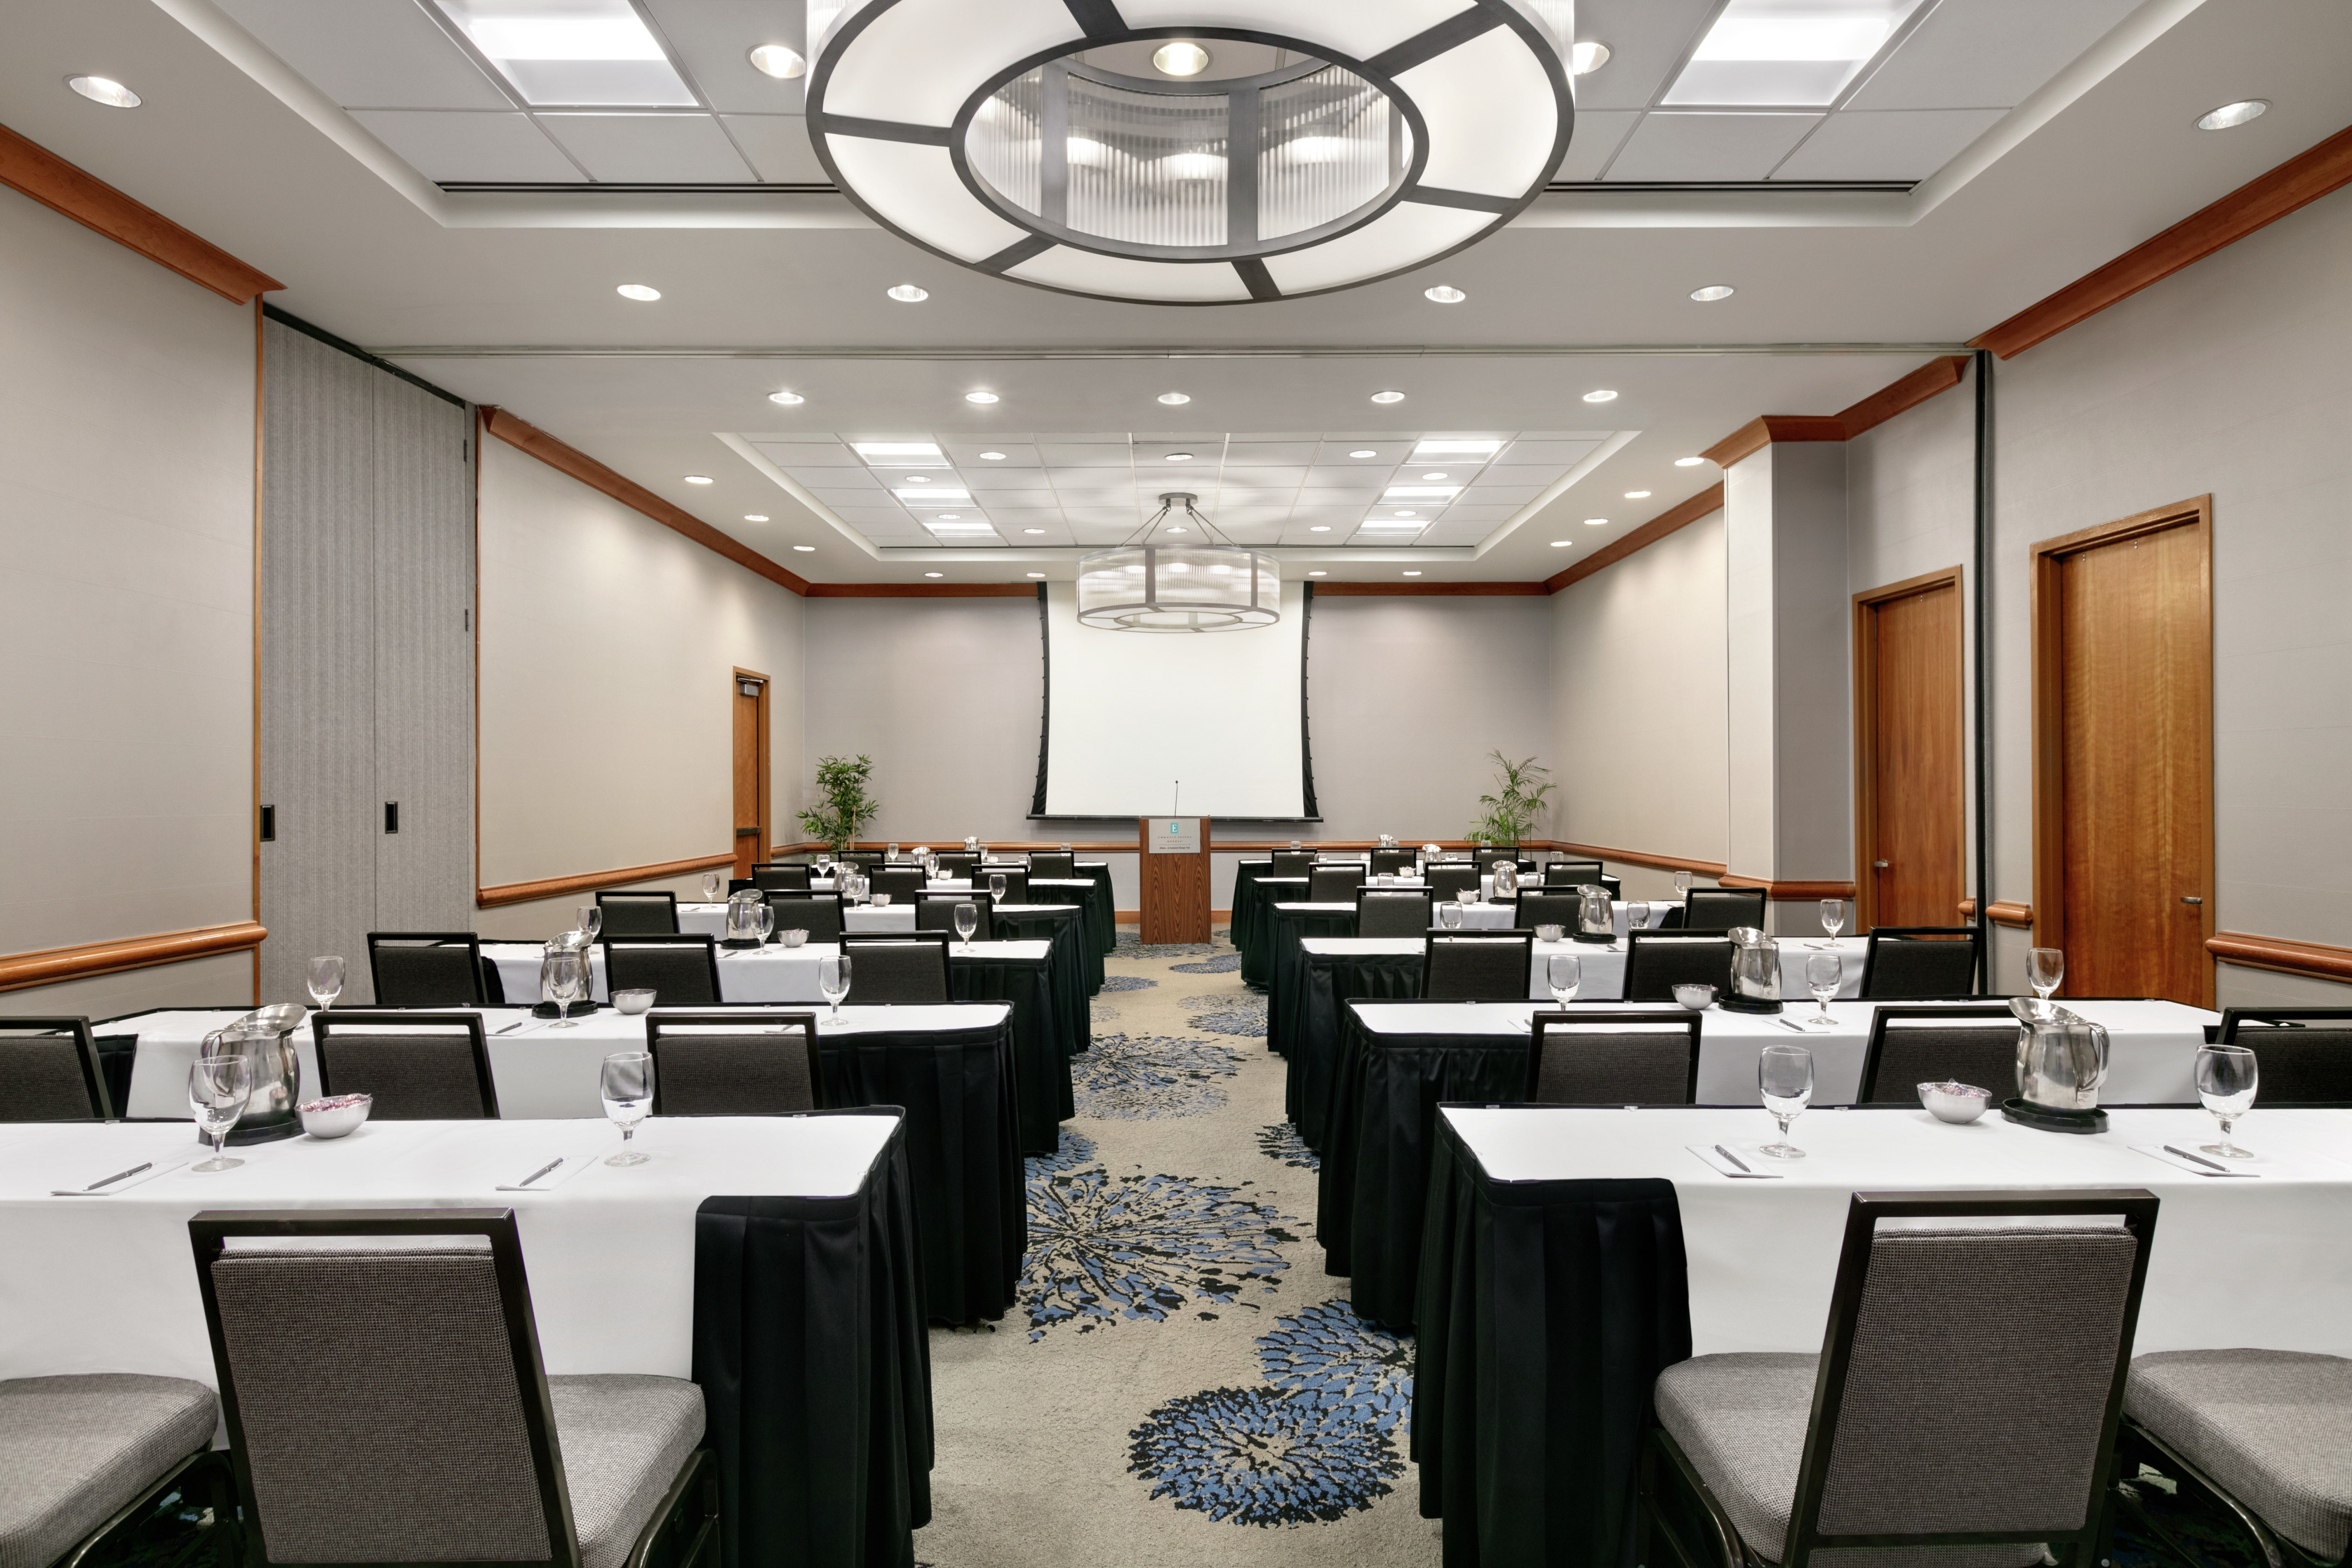 Spacious meeting room facility equipped with classroom style tables, projector screen with equipment, and podium.